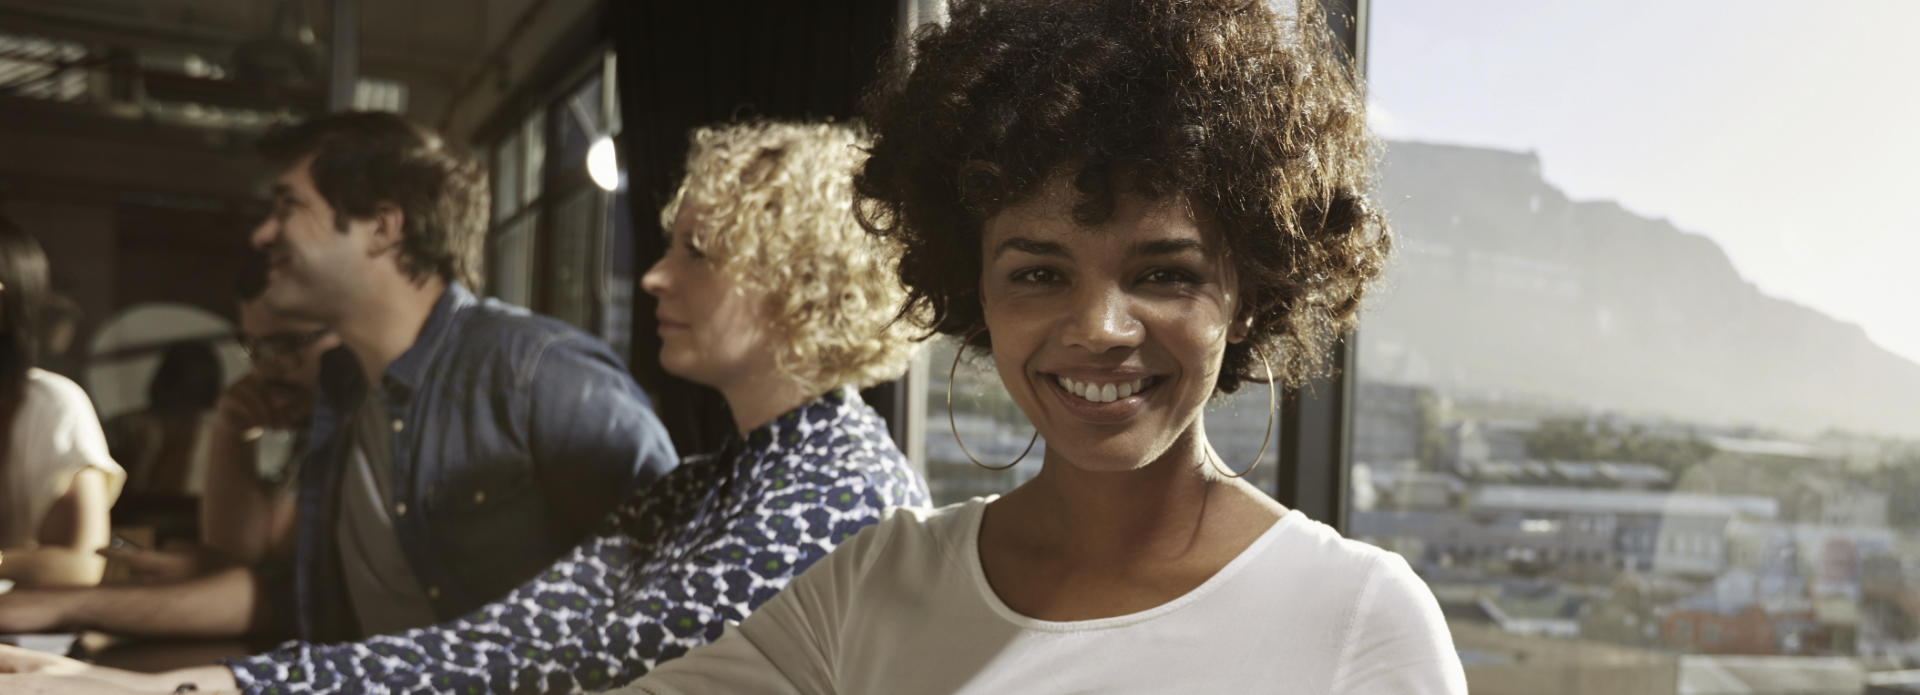 beautiful smiling woman with curly hair